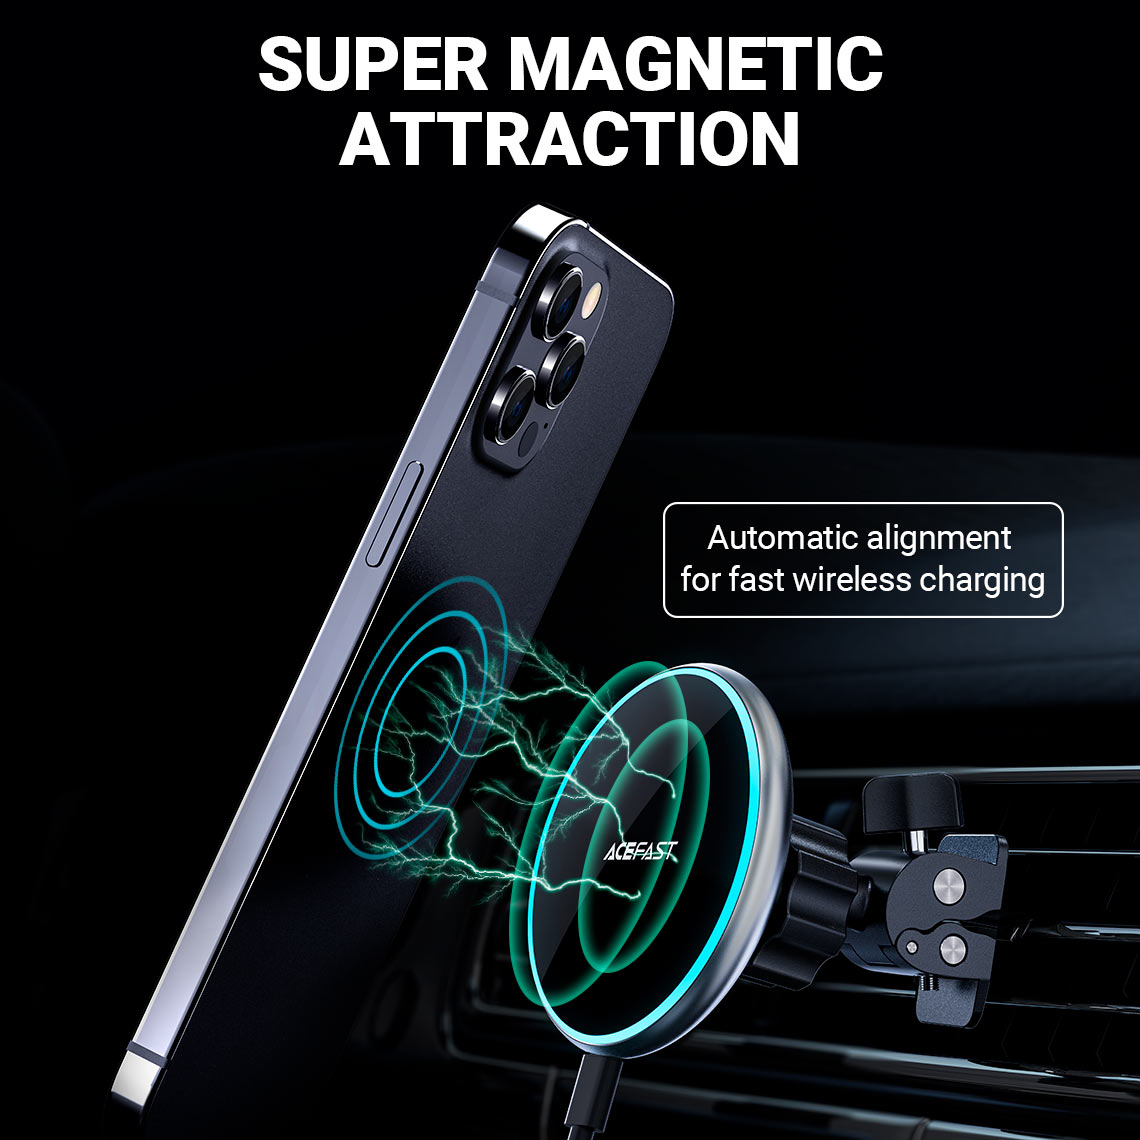 acefast d3 magnetic car holder wireless charger magnetic attraction